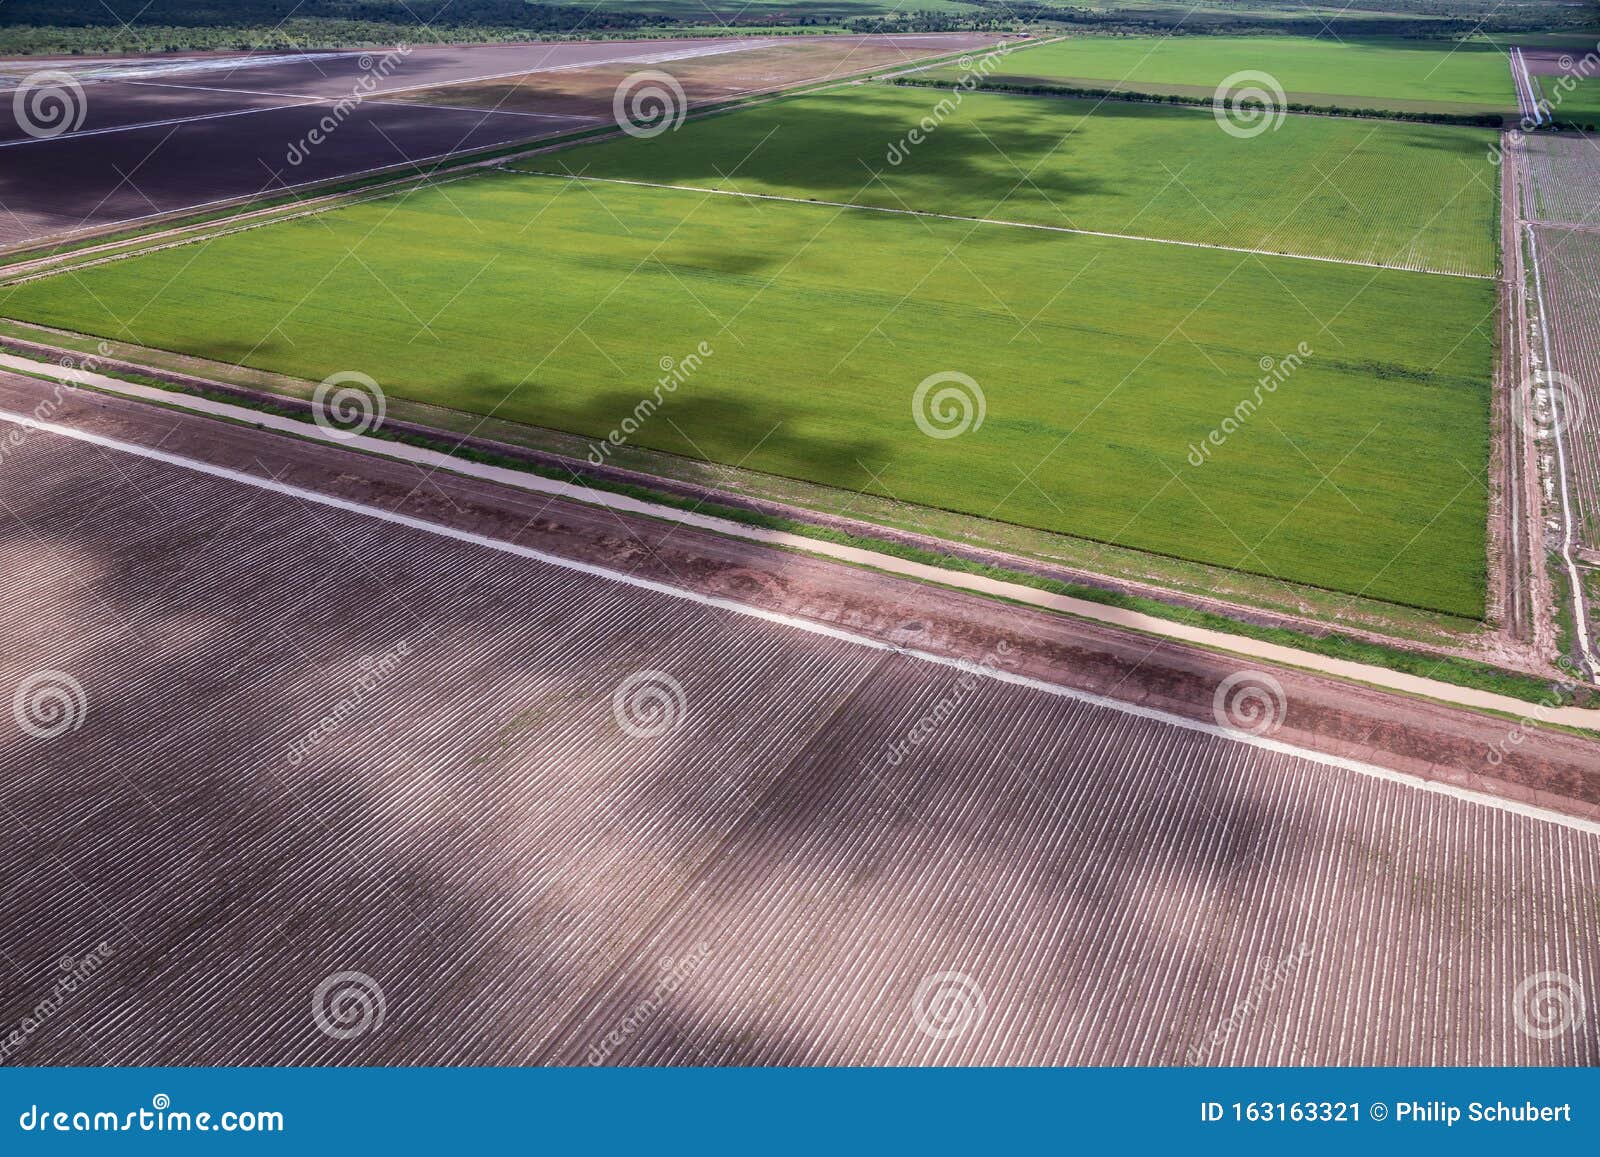 view of sandalwood plantation in the ord river irrigation scheme at kununurra in the kimberley